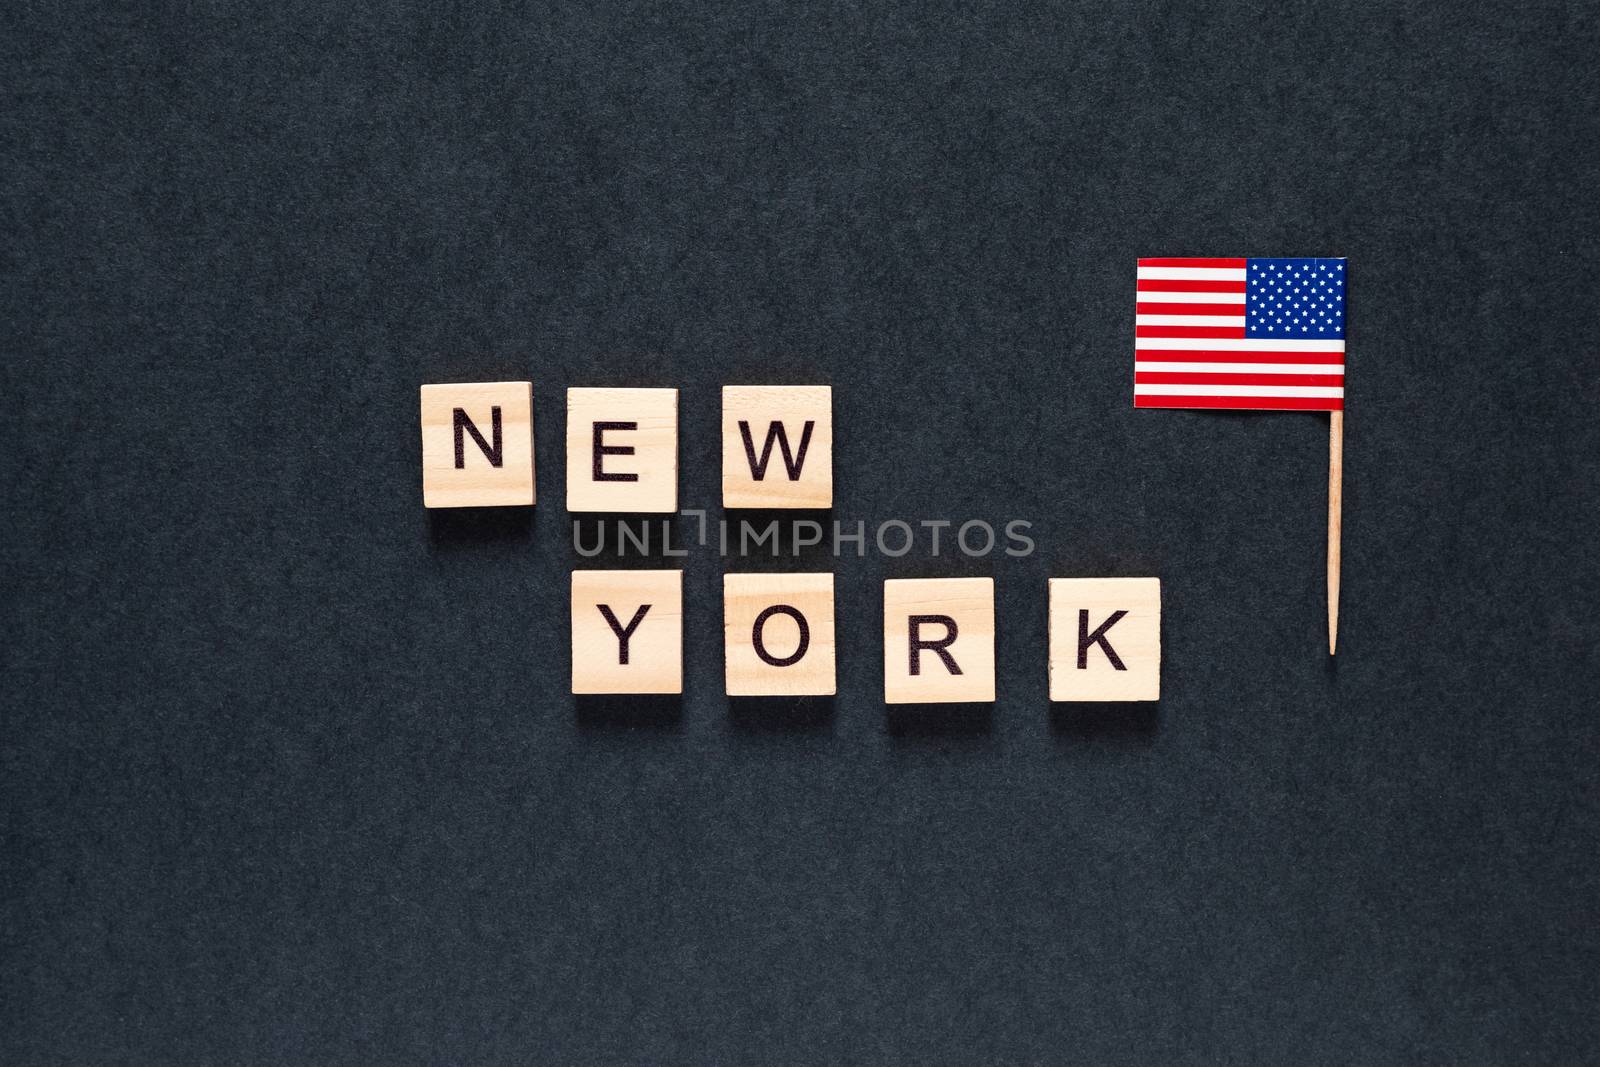 new york inscription on a black background with the American flag. by Pirlik